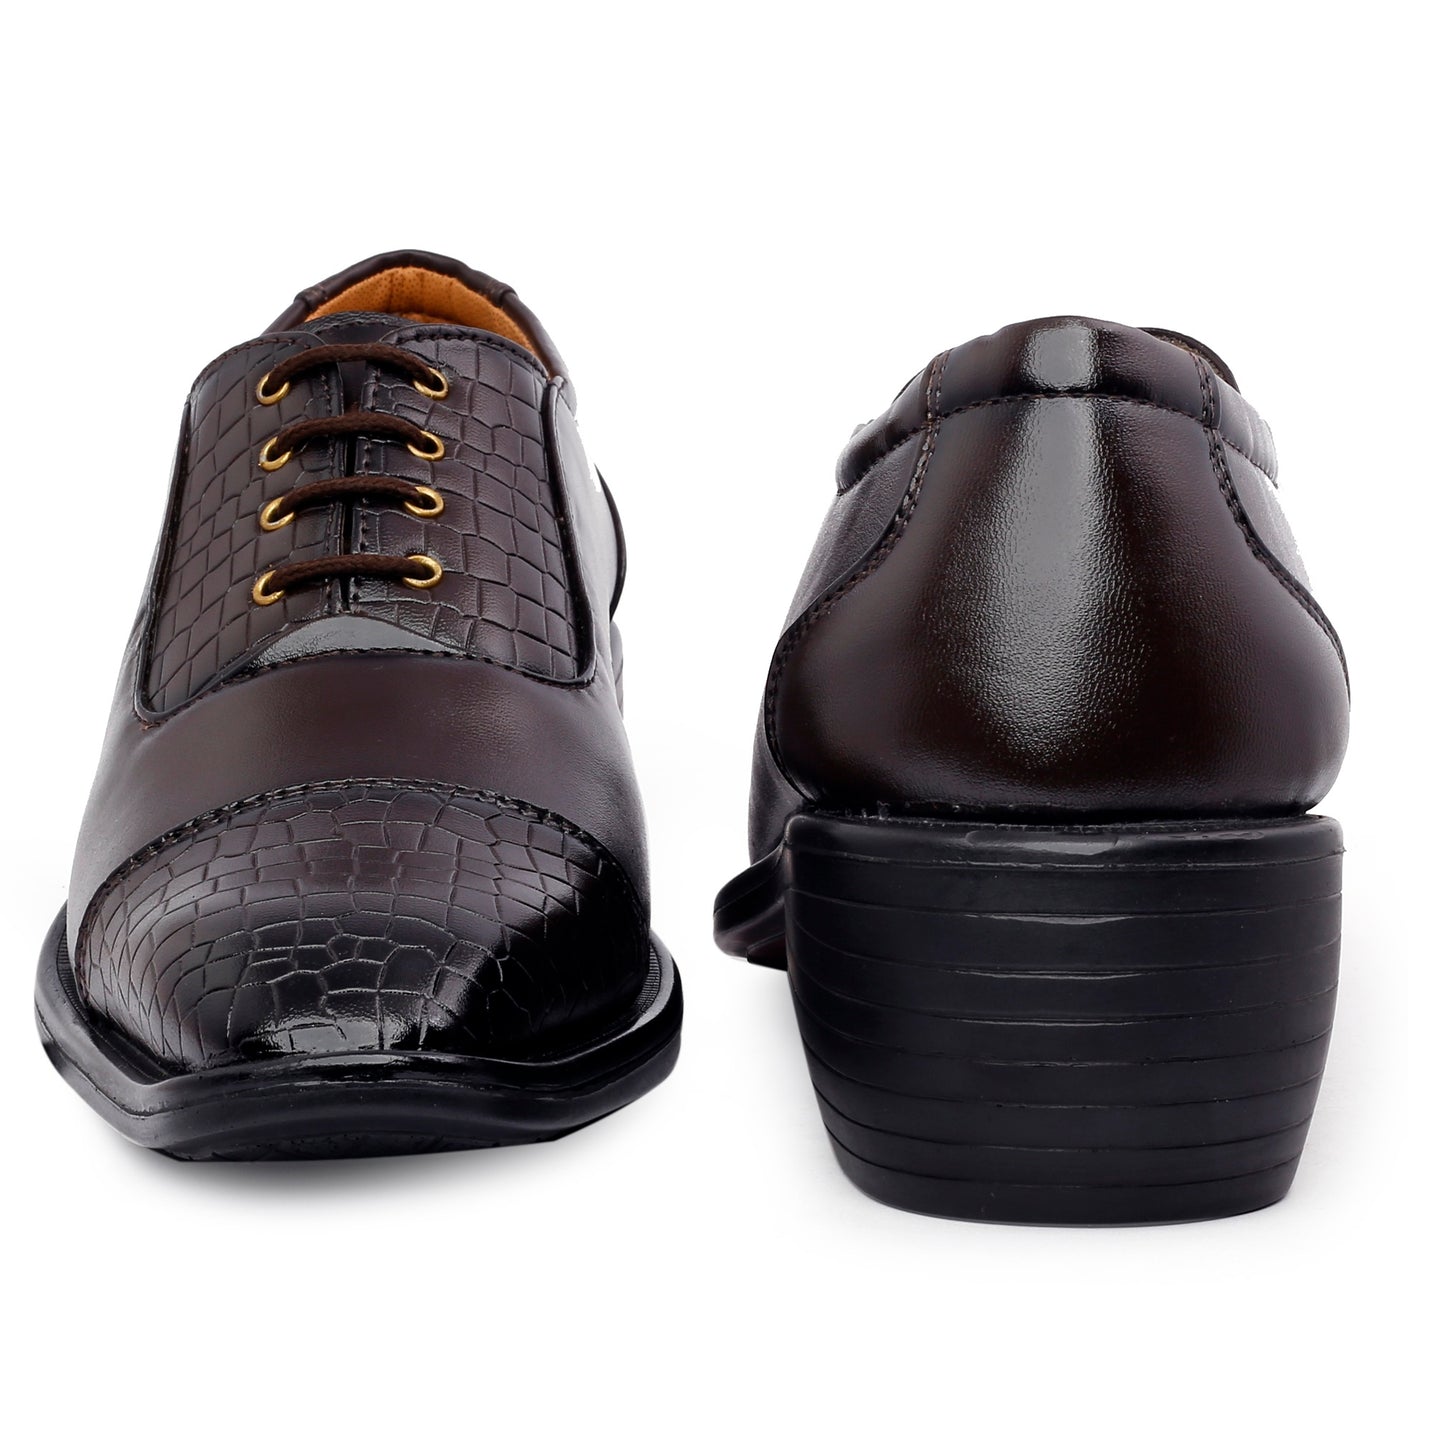 BXXY Men's Height Increasing Fashionable Formal and Casual Wear Lace-Up Shoe